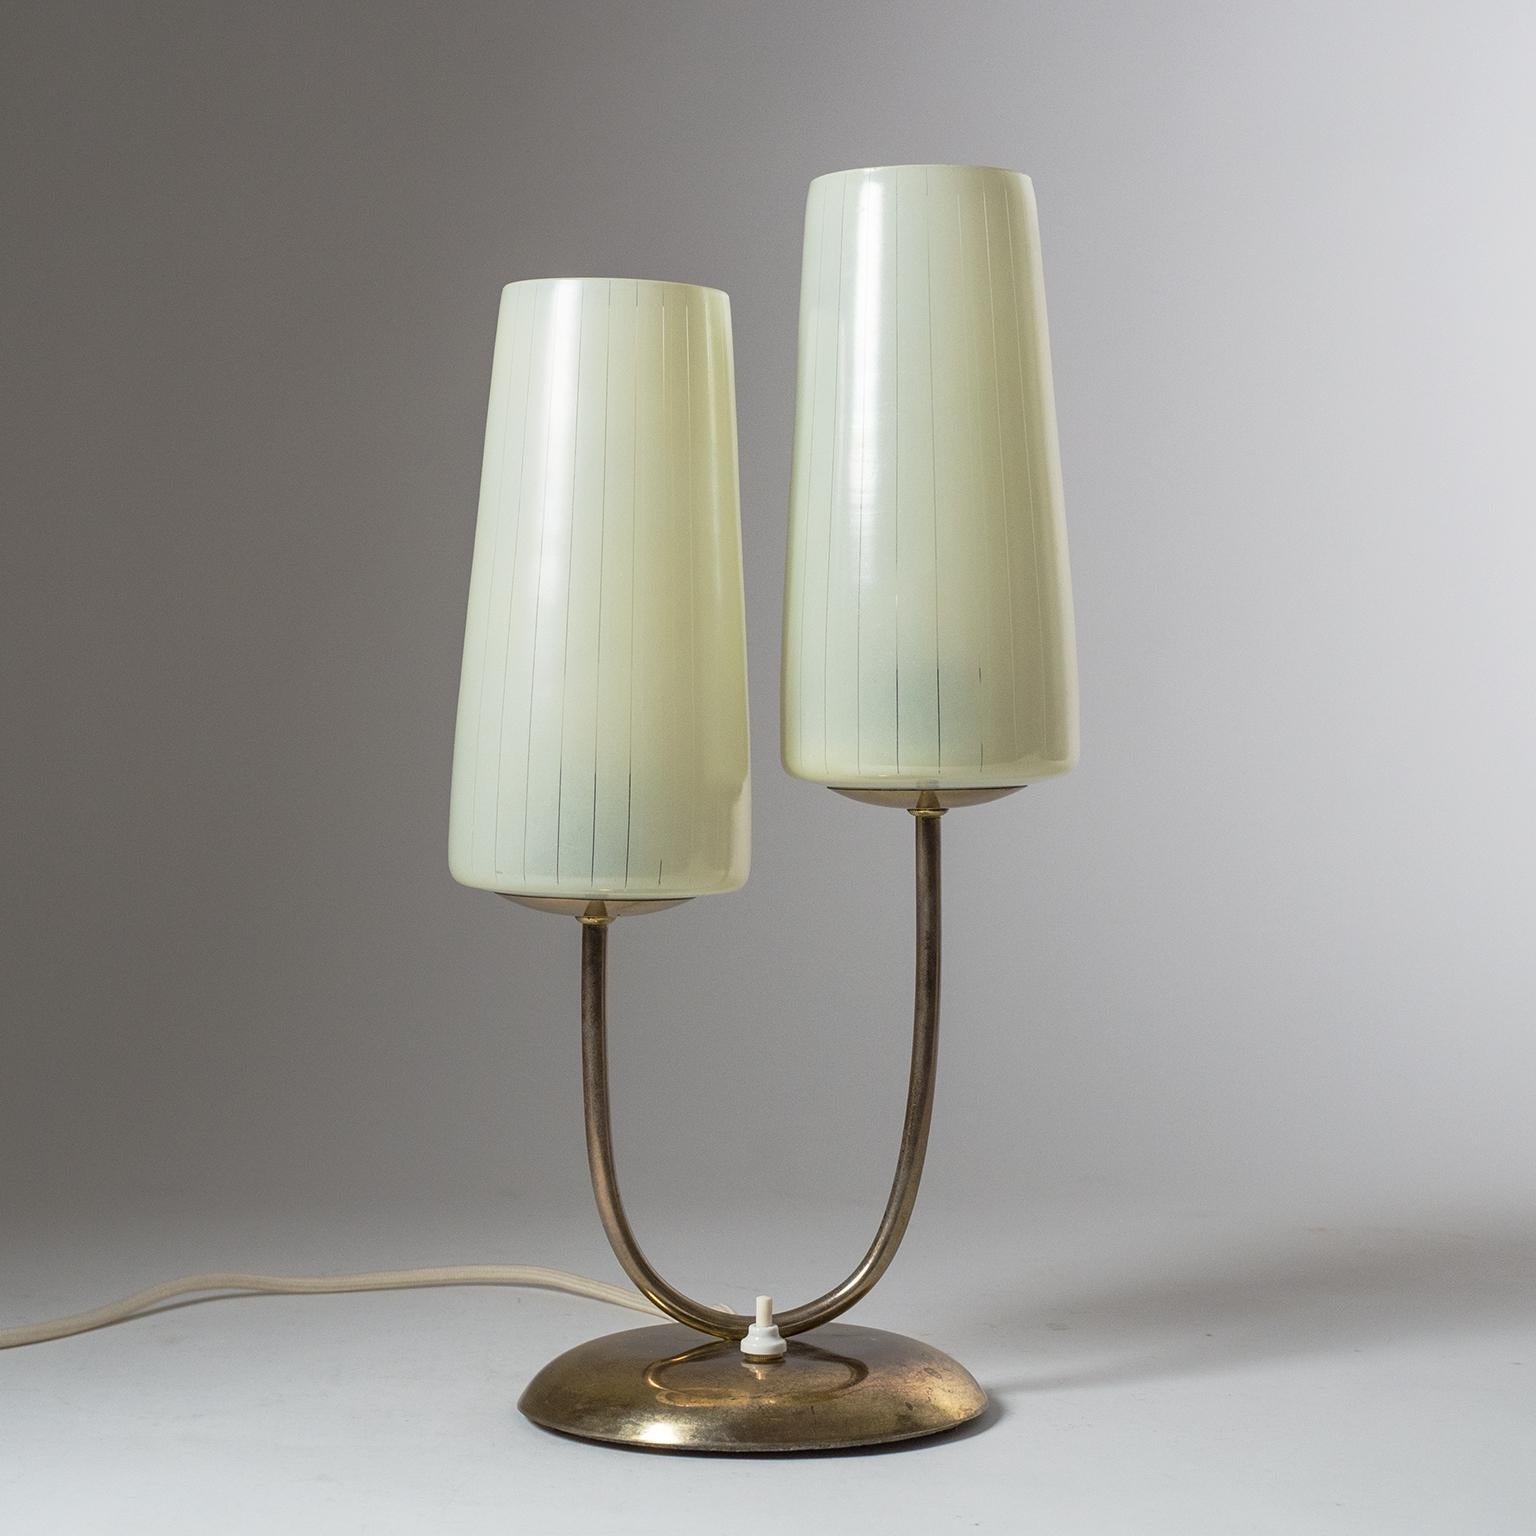 Elegant brass table lamp with dual glass shades from the 1940-1950s. The long glass diffuser are enameled in Ivory with clear pinstripes. Fine original condition with patina on the brass. Two original bakelite E27 sockets with new wiring.